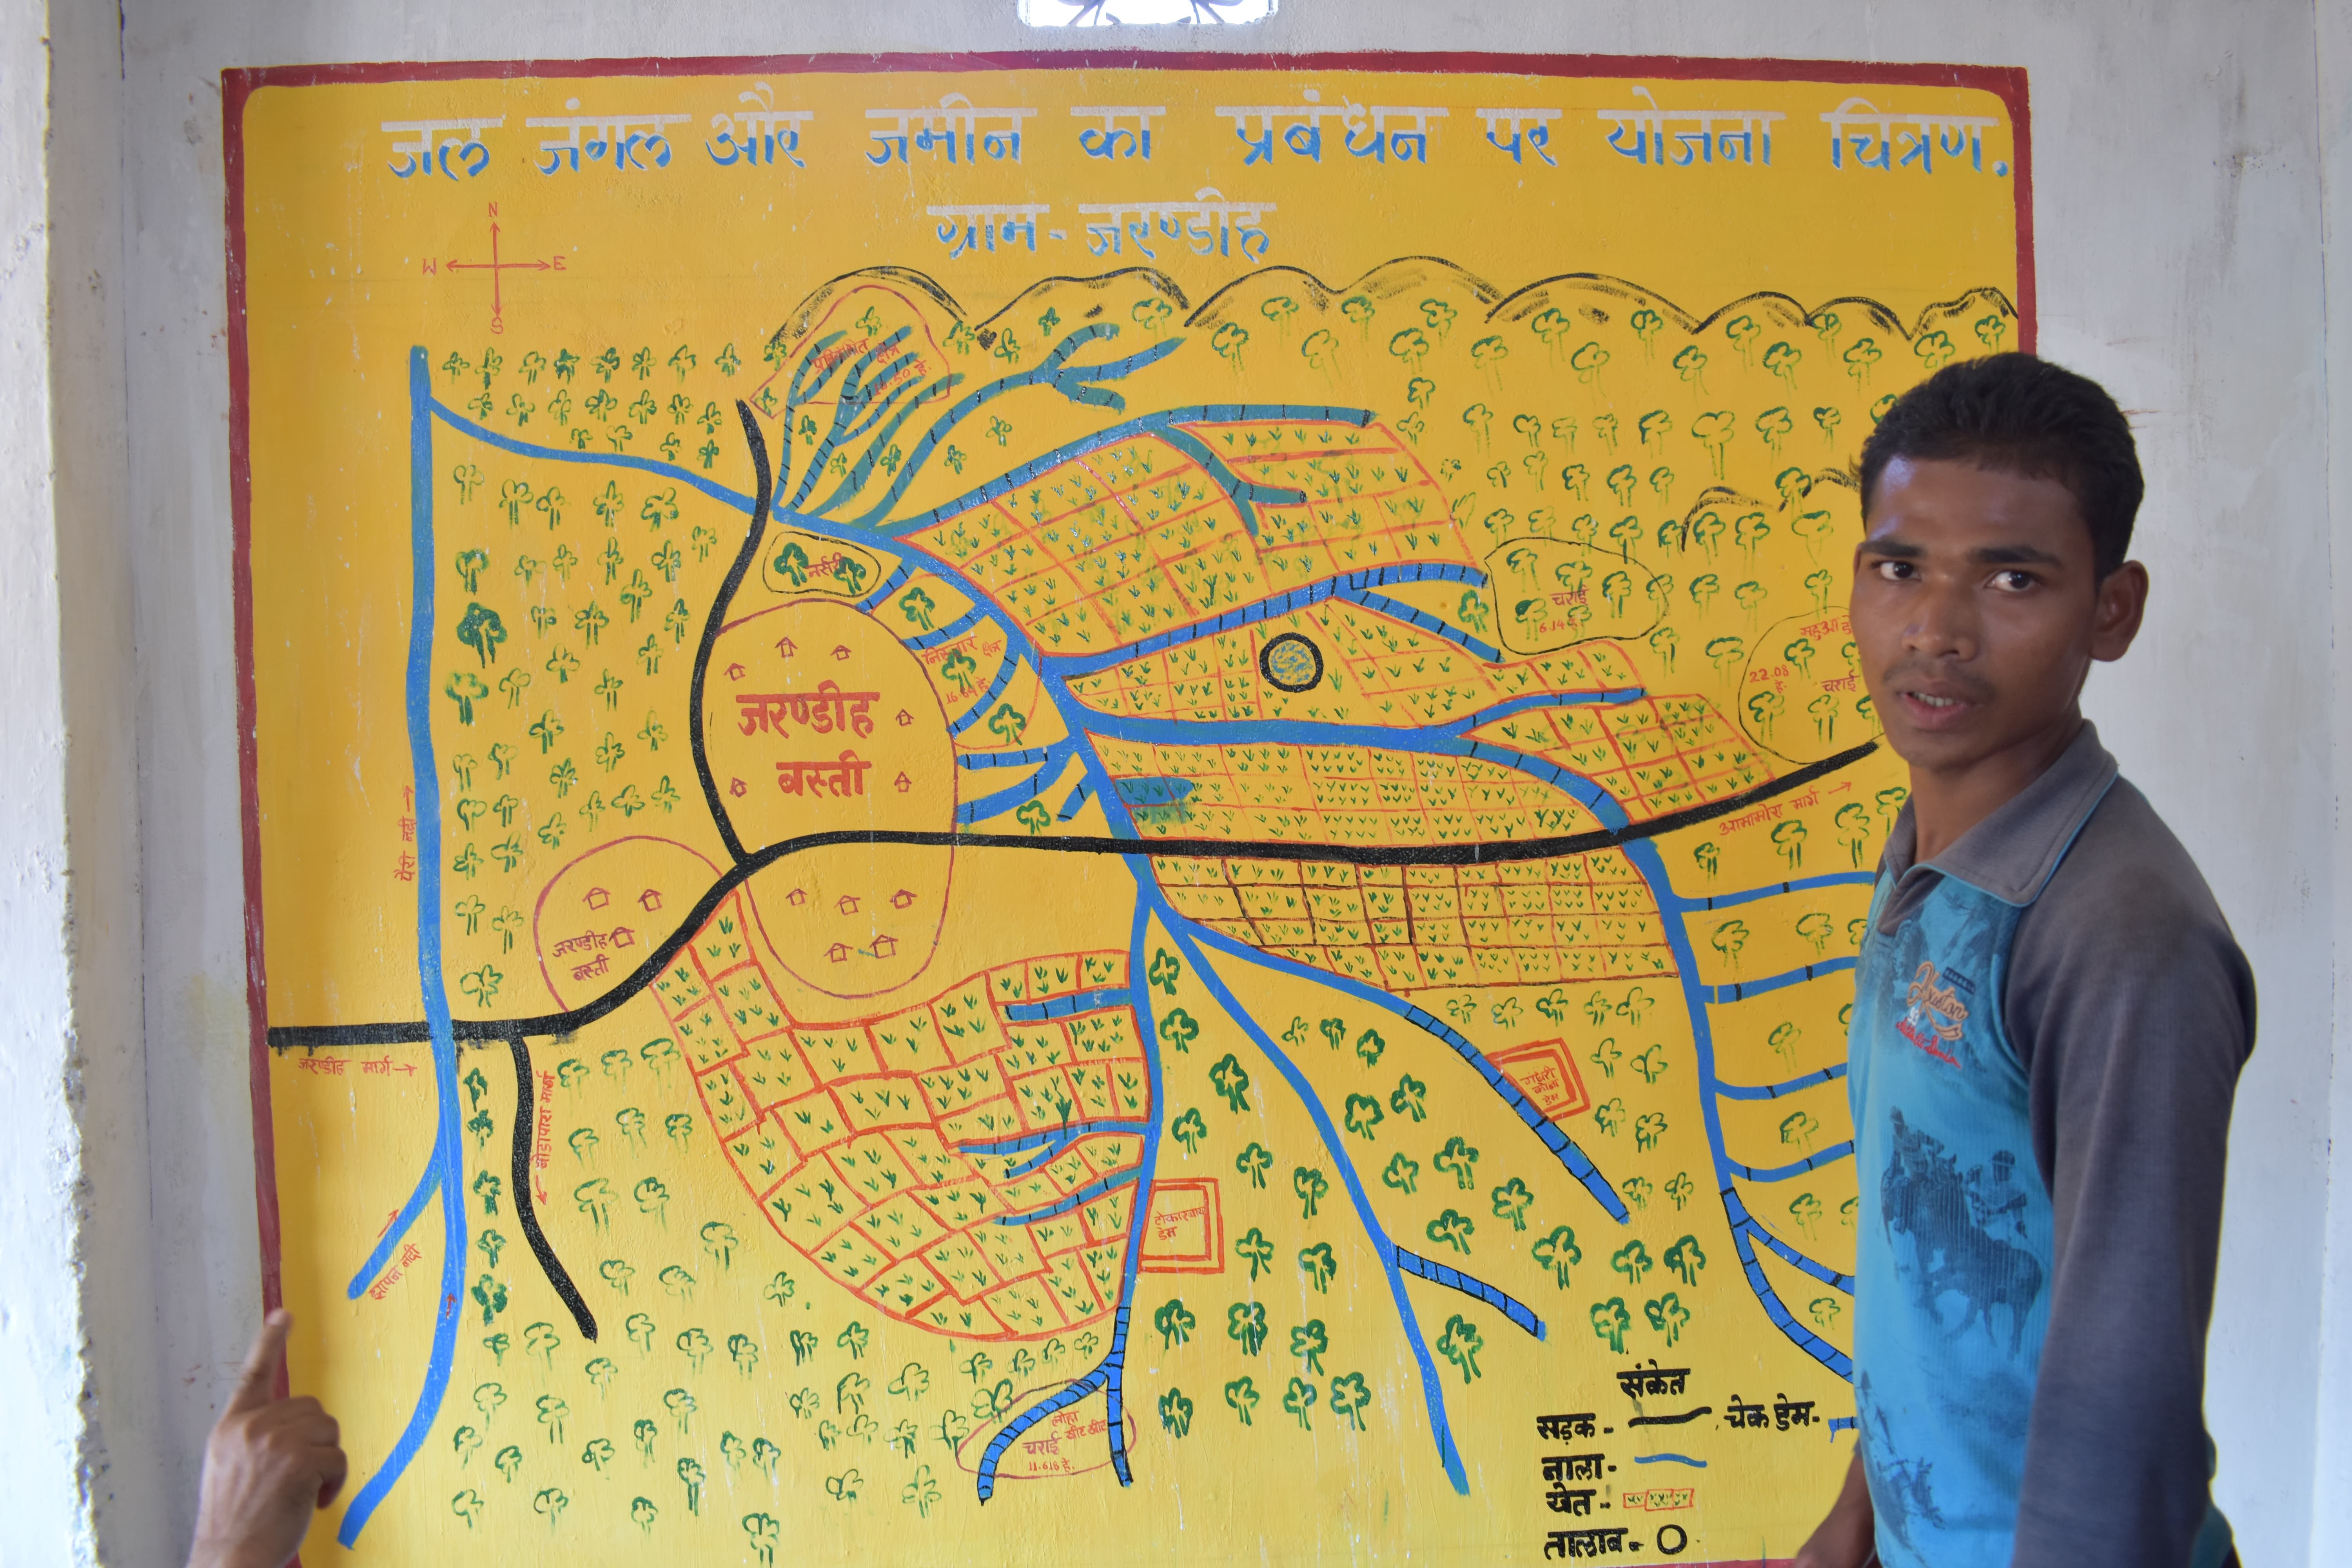 Charan Singh Sori, a youth undergoing GPS training, presenting how the village manages the community forest in front of the village resource map.